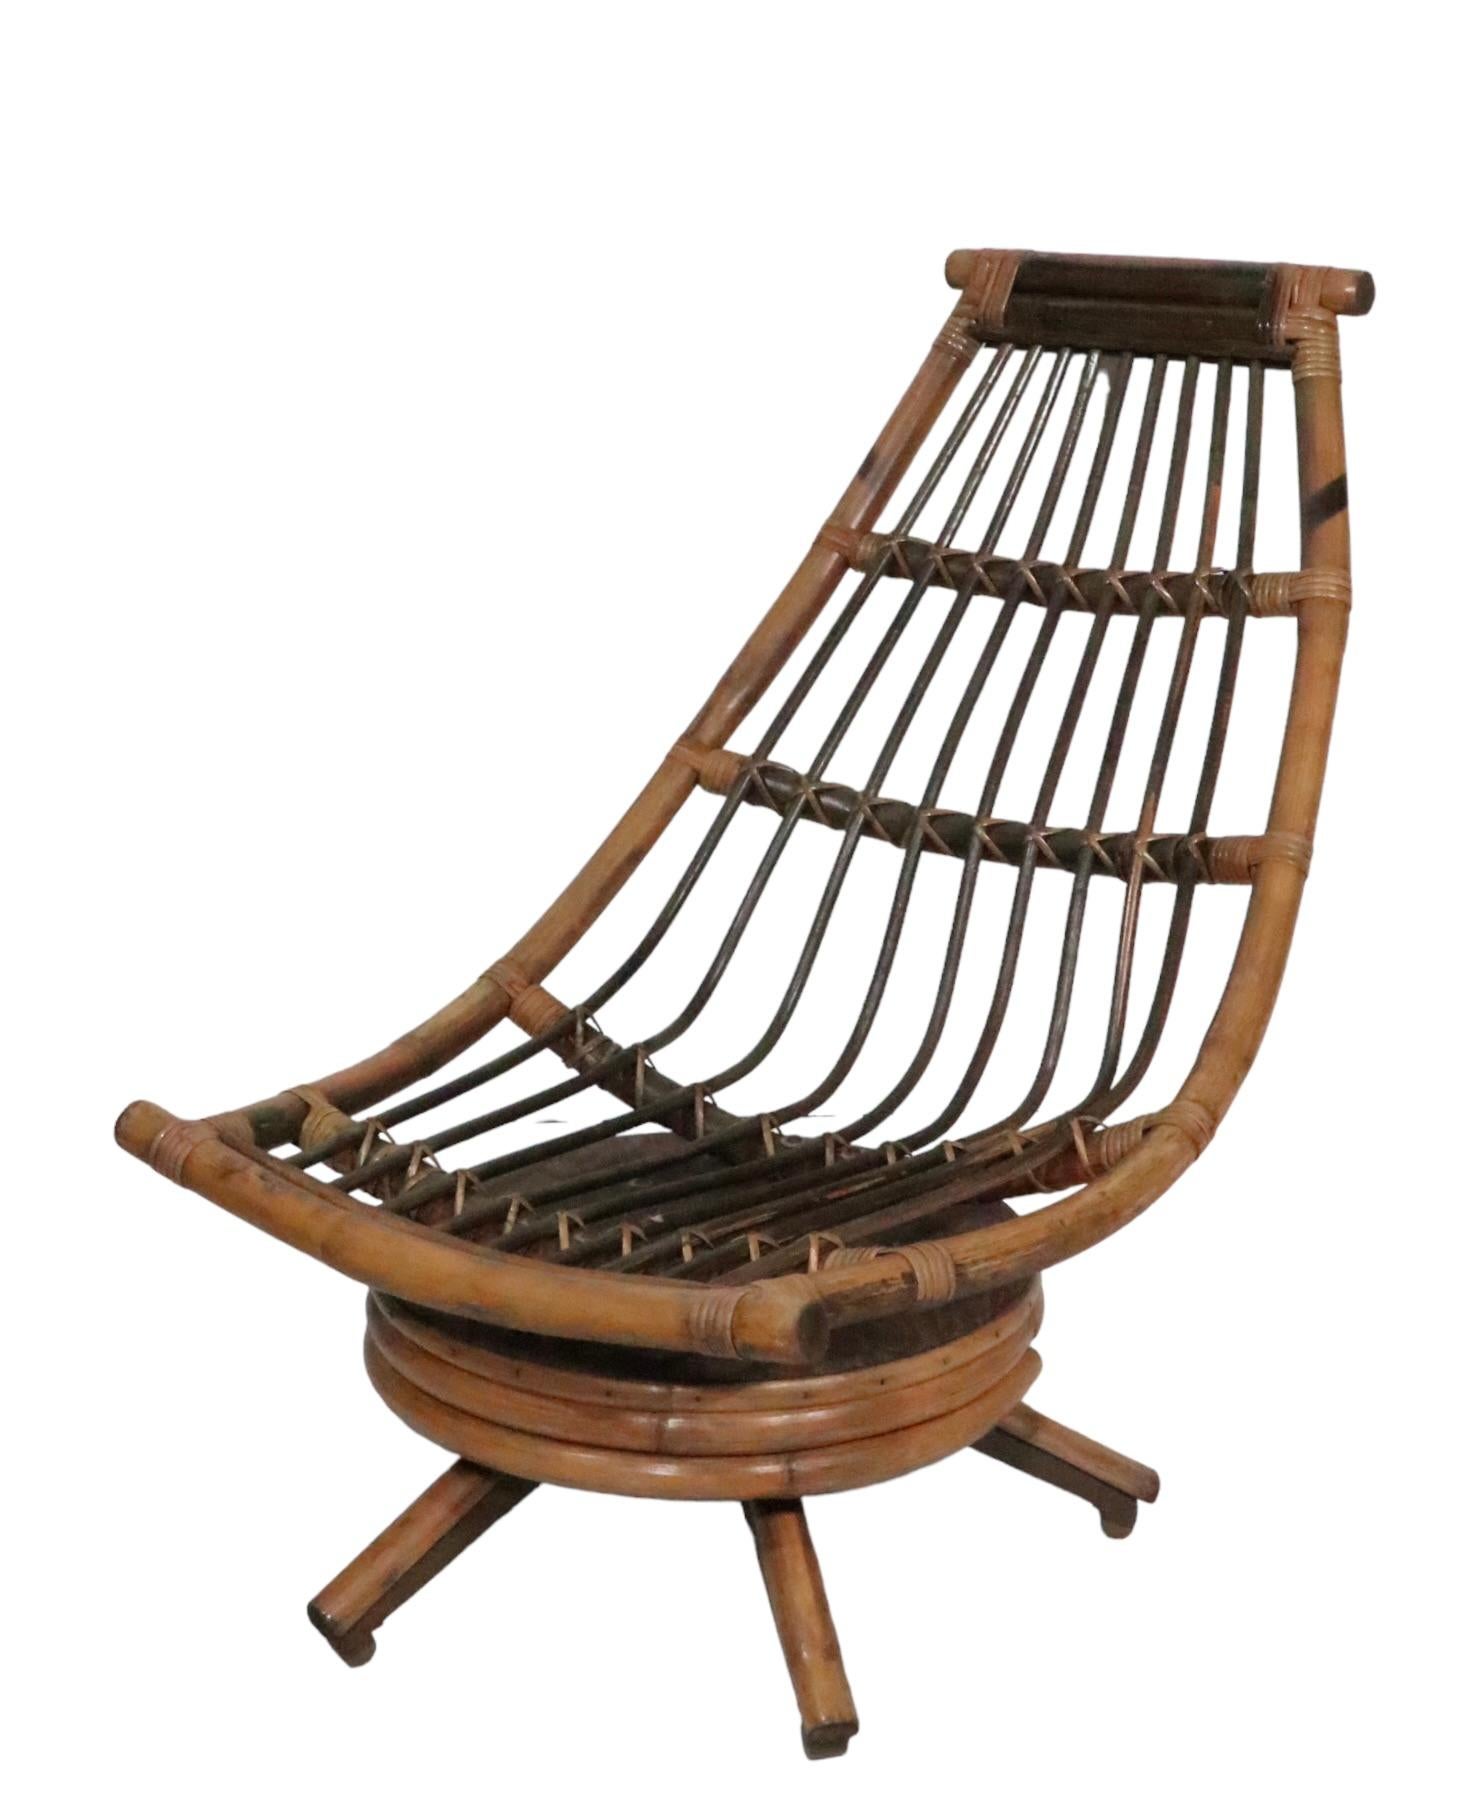 Midcentury Swivel Tilt Bamboo Lounge Chaise Chair, circa 1950/ 1960s For Sale 2